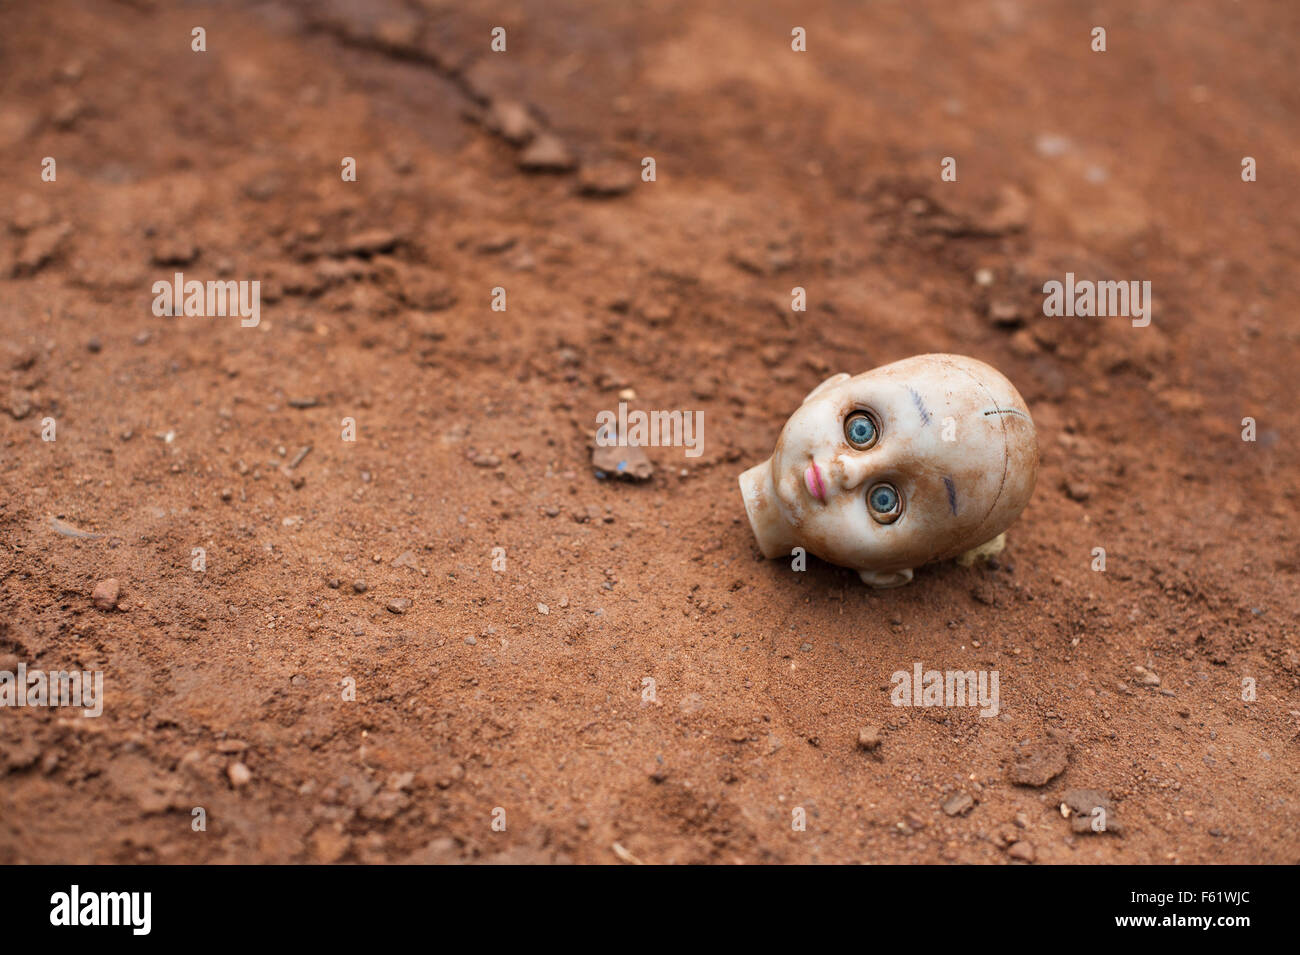 The head of a broken toy is lying in the ground, blue eyes wide opened. Stock Photo